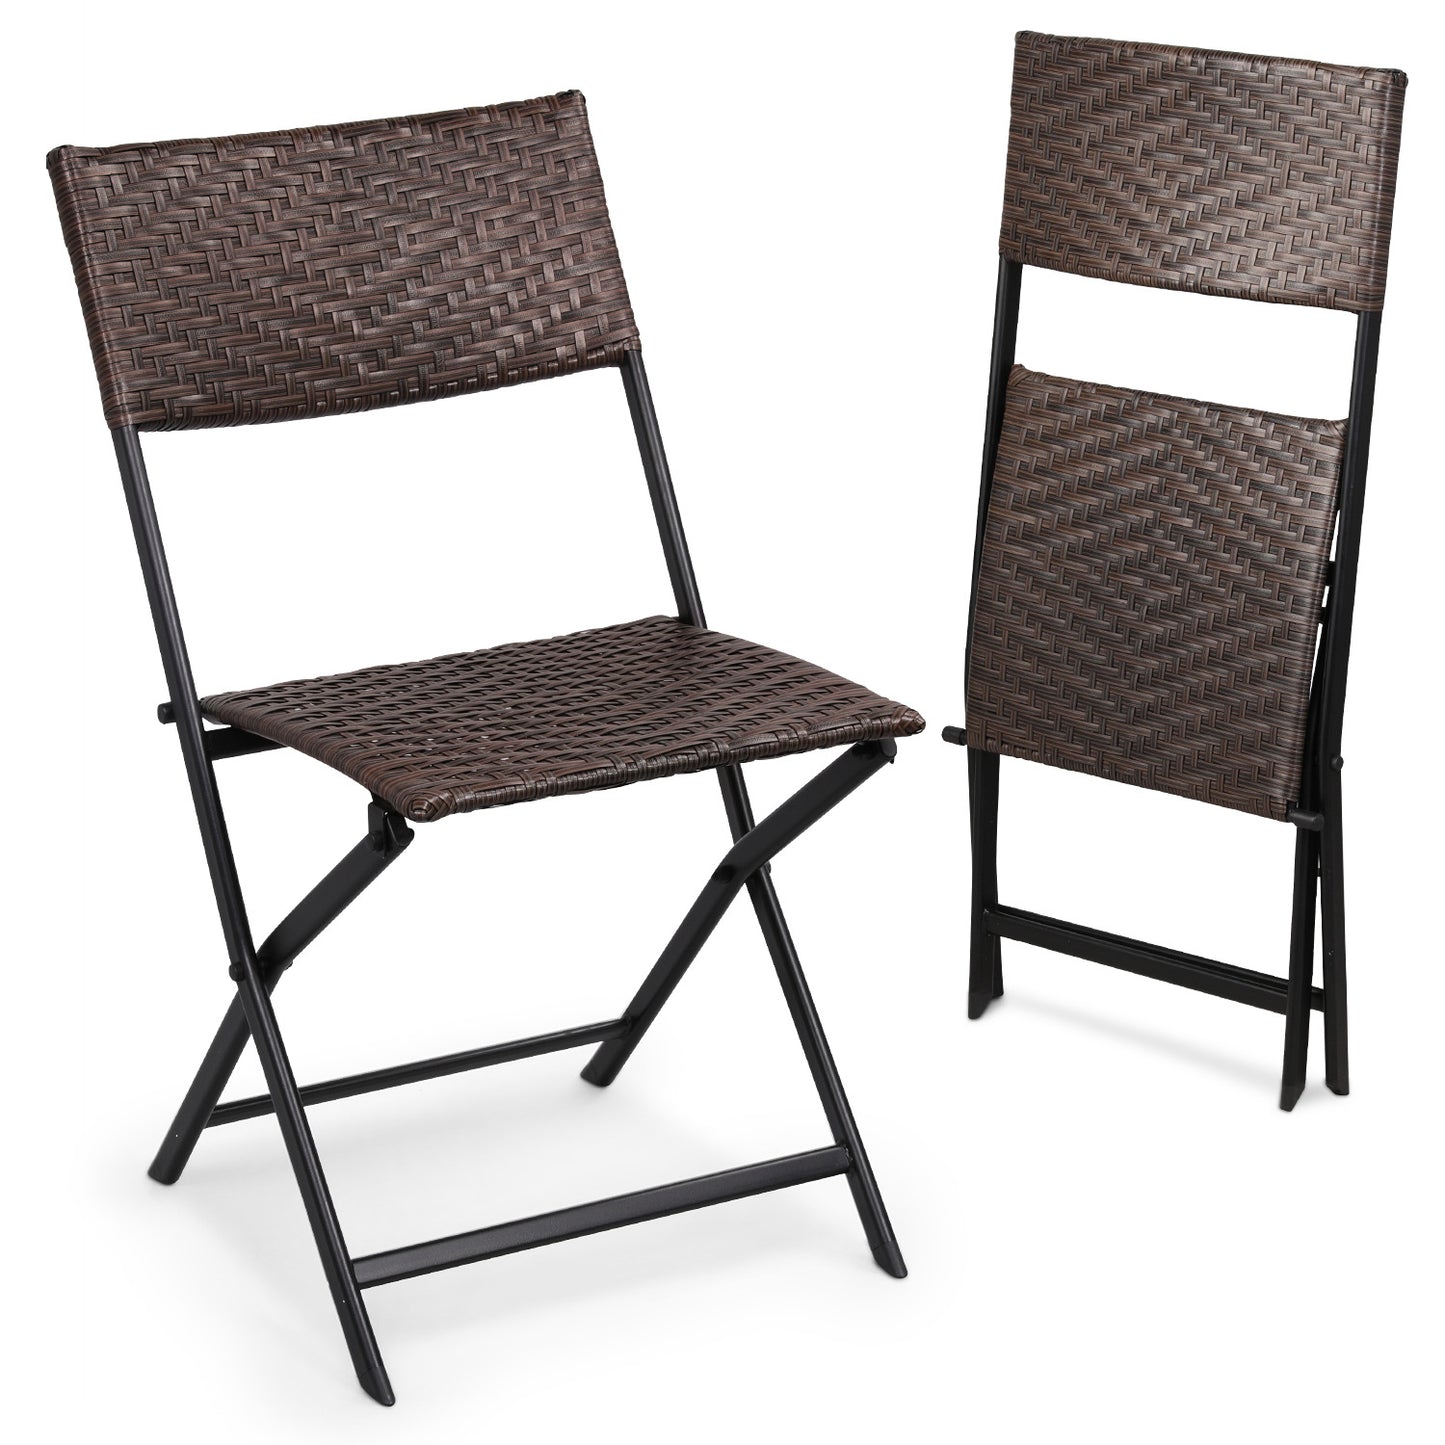 Set of 2 Foldable Patio Rattan Wicker Chair